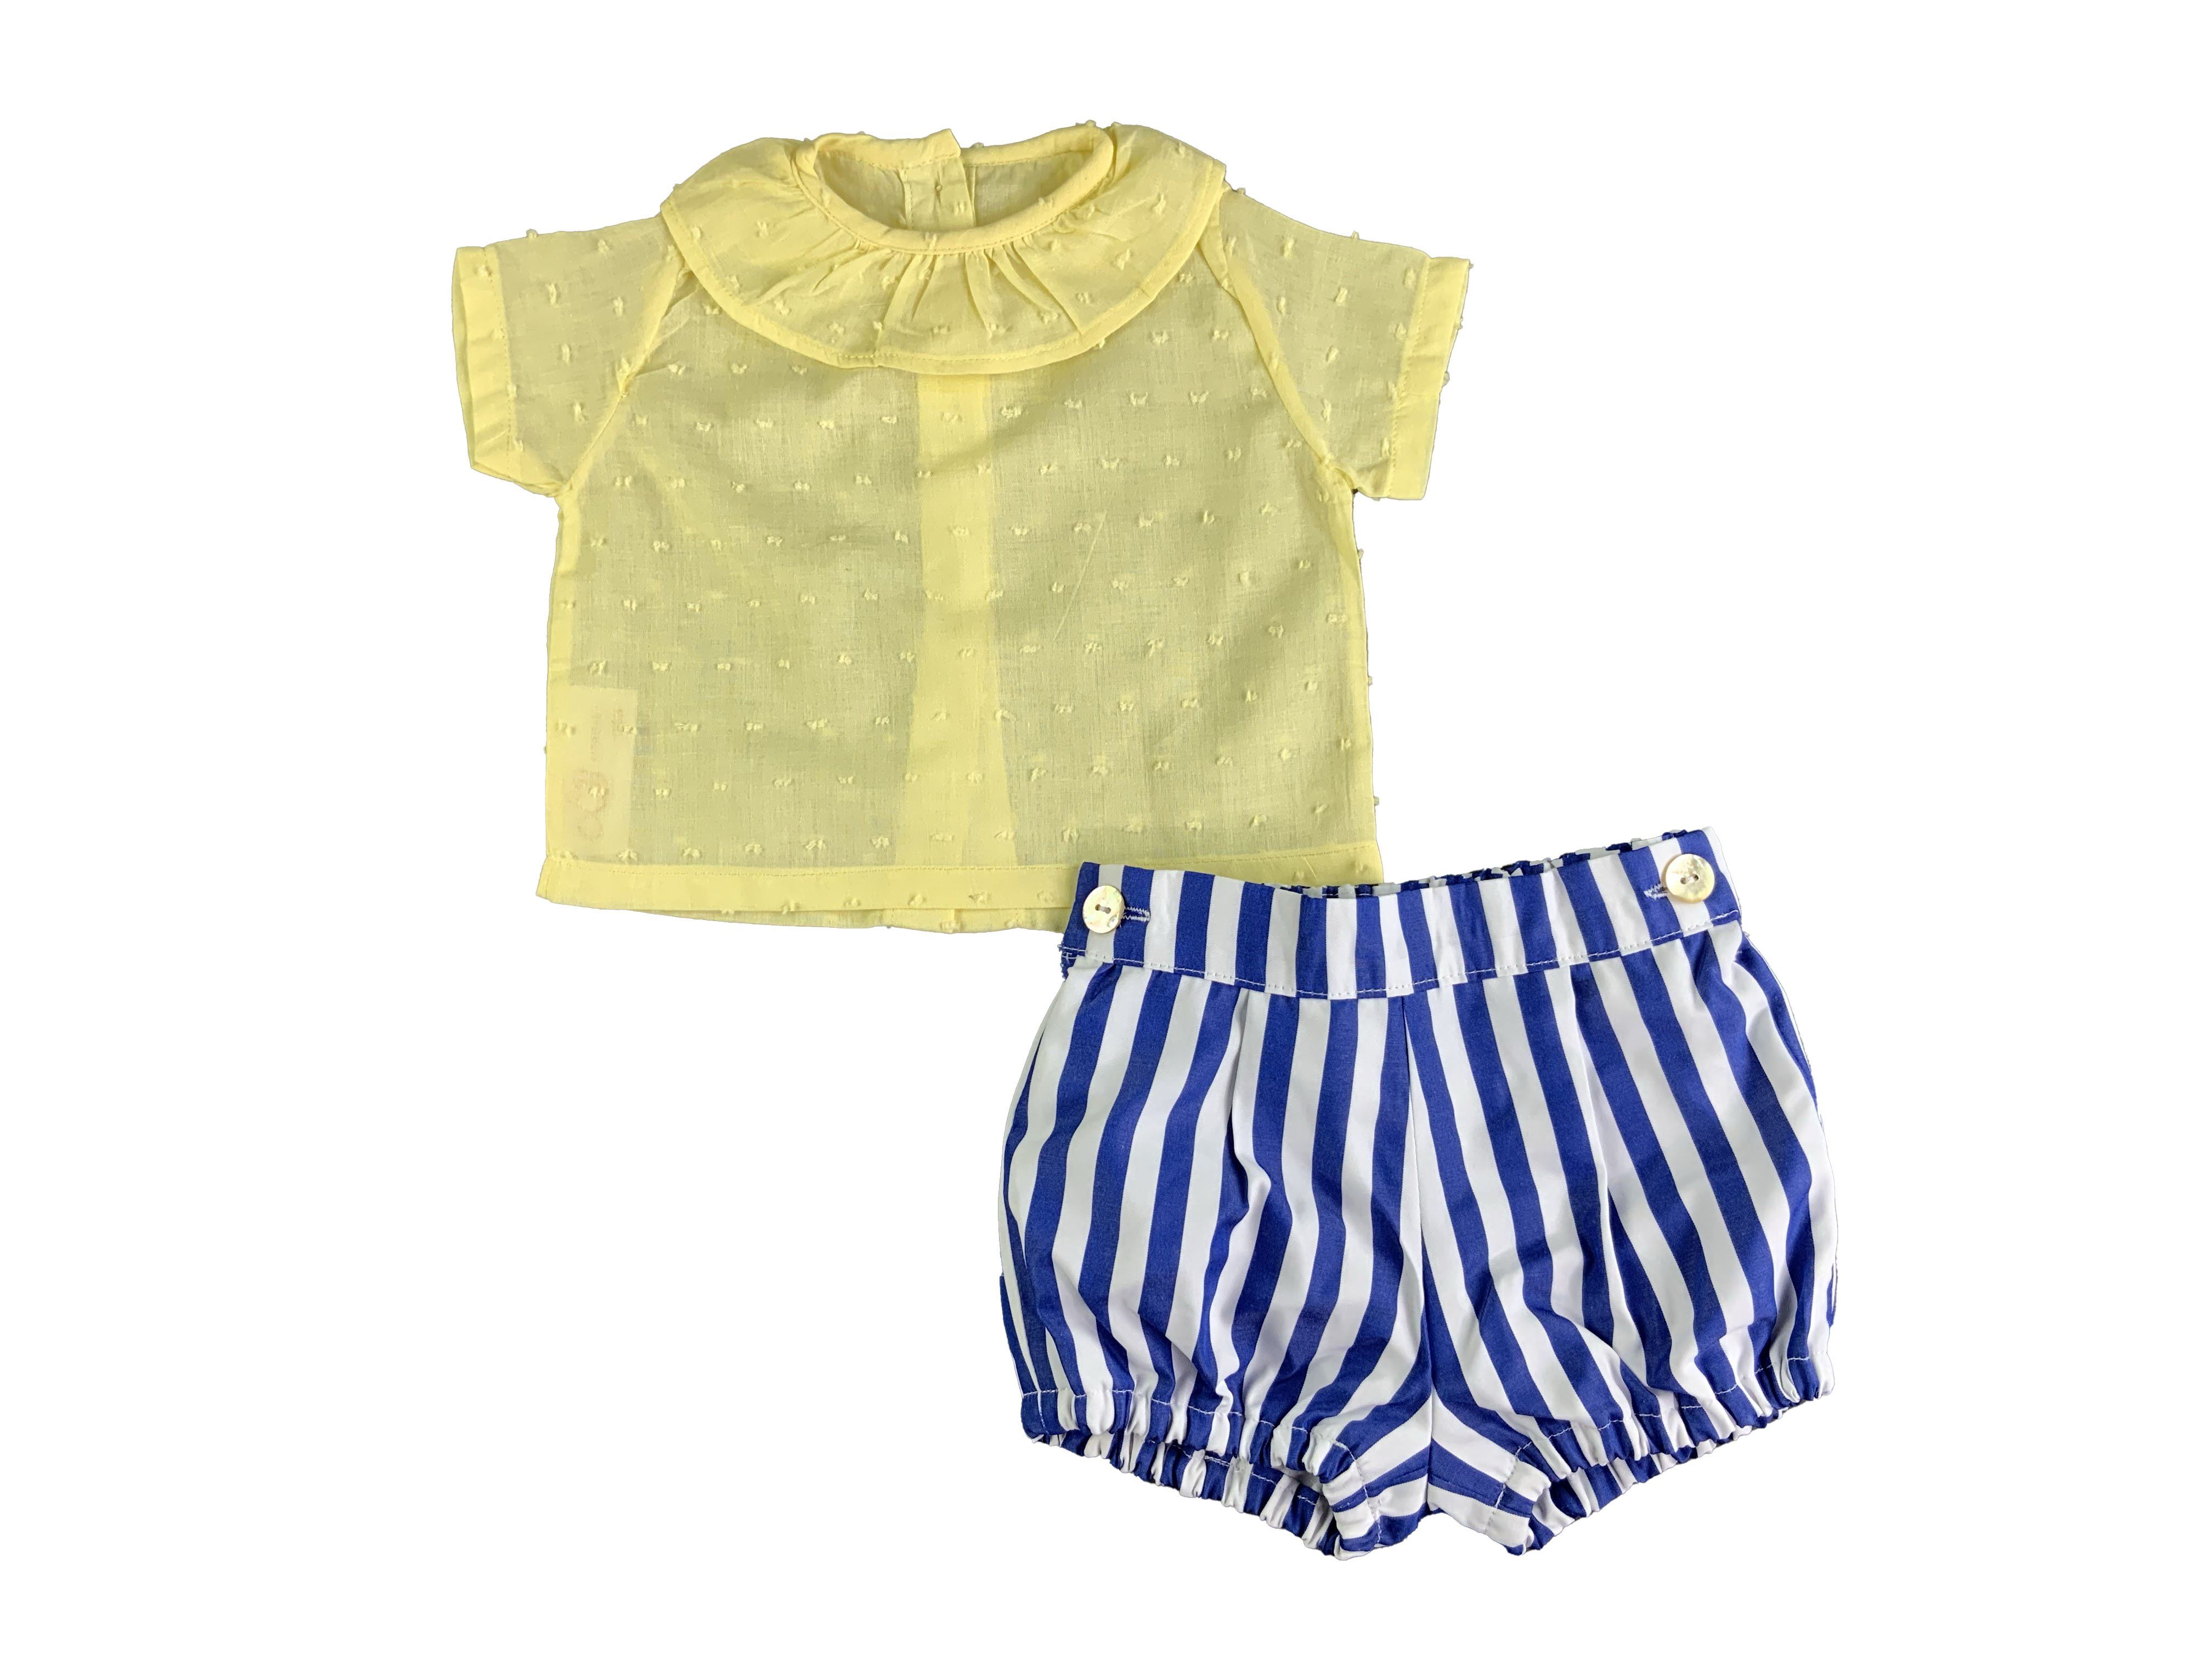 Yellow Round Ruffled Collar Top and Blue-White Stripe Shorts-Boy's Clothing-Boy's Clothing Store Shirt & Short Set Alfa Baby Boutique 0-3 Blue Male